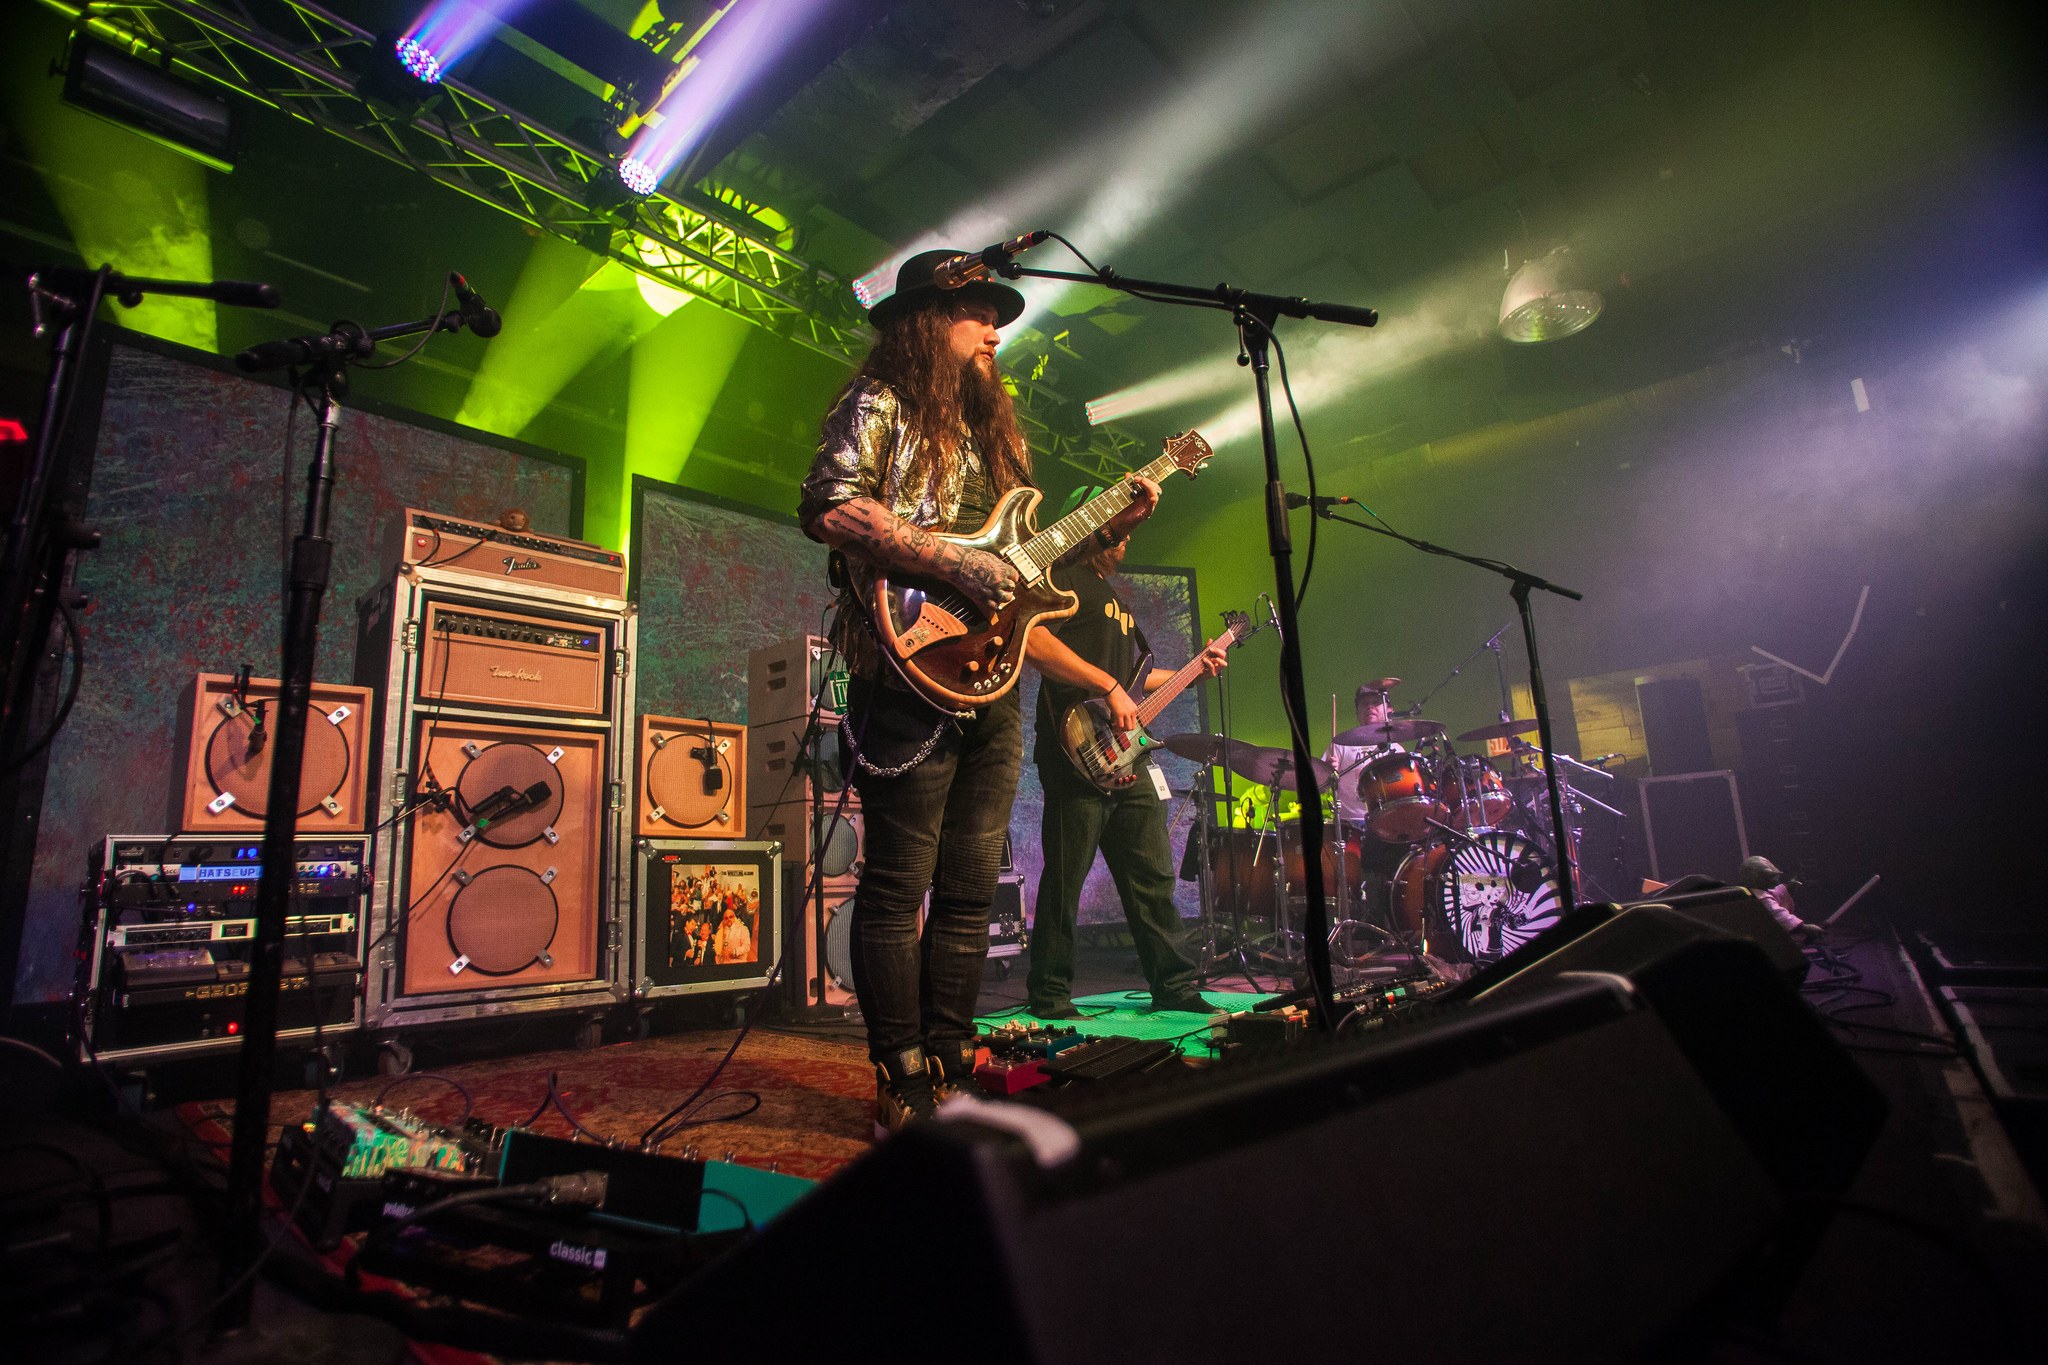 Who Is Twiddle? Chicago 2017 In Review and Media